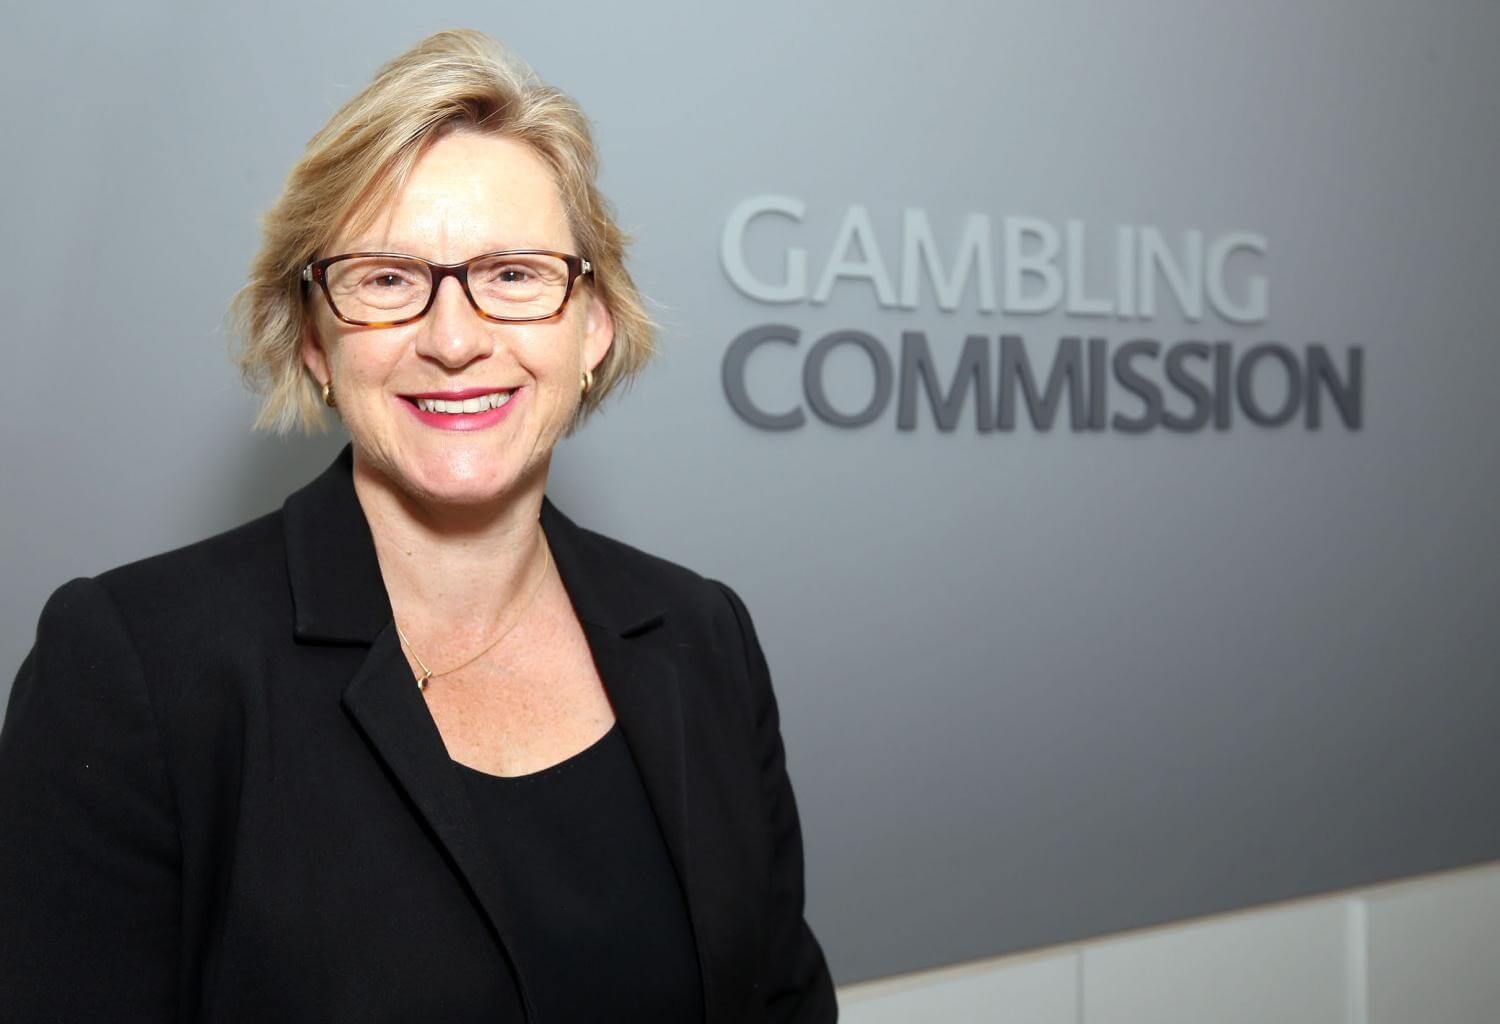 Former Chief Executive of the UK Gambling Commission Sarah Harrison